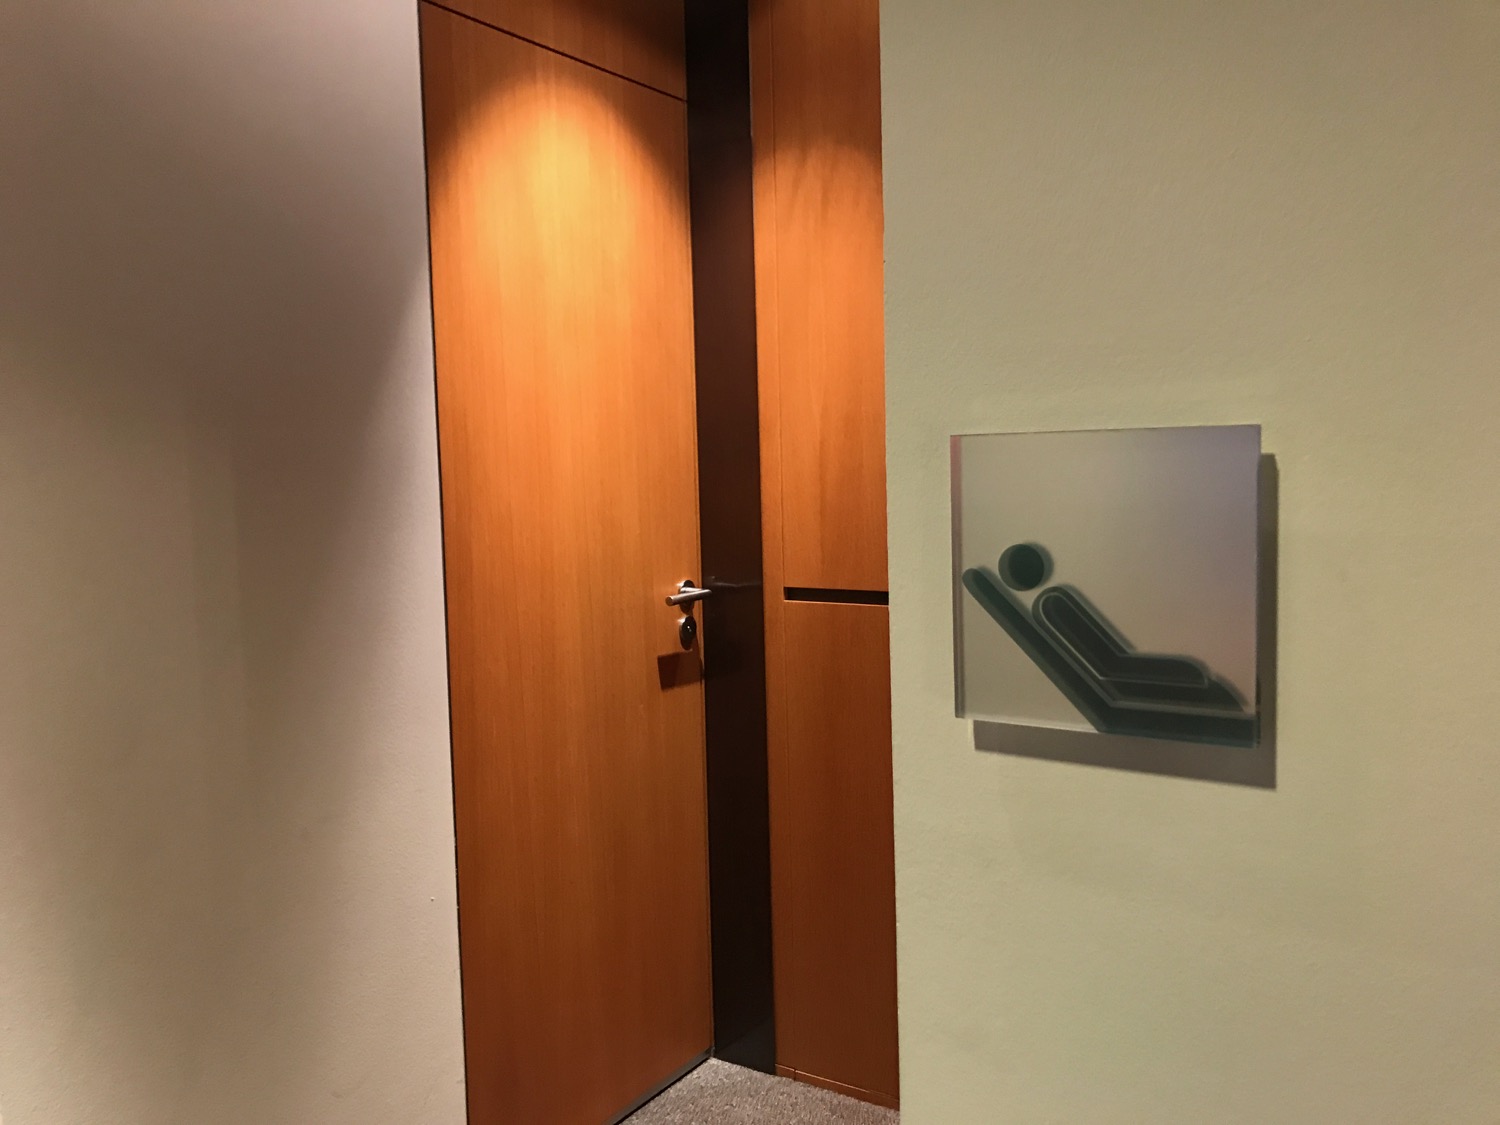 a door with a picture on the wall